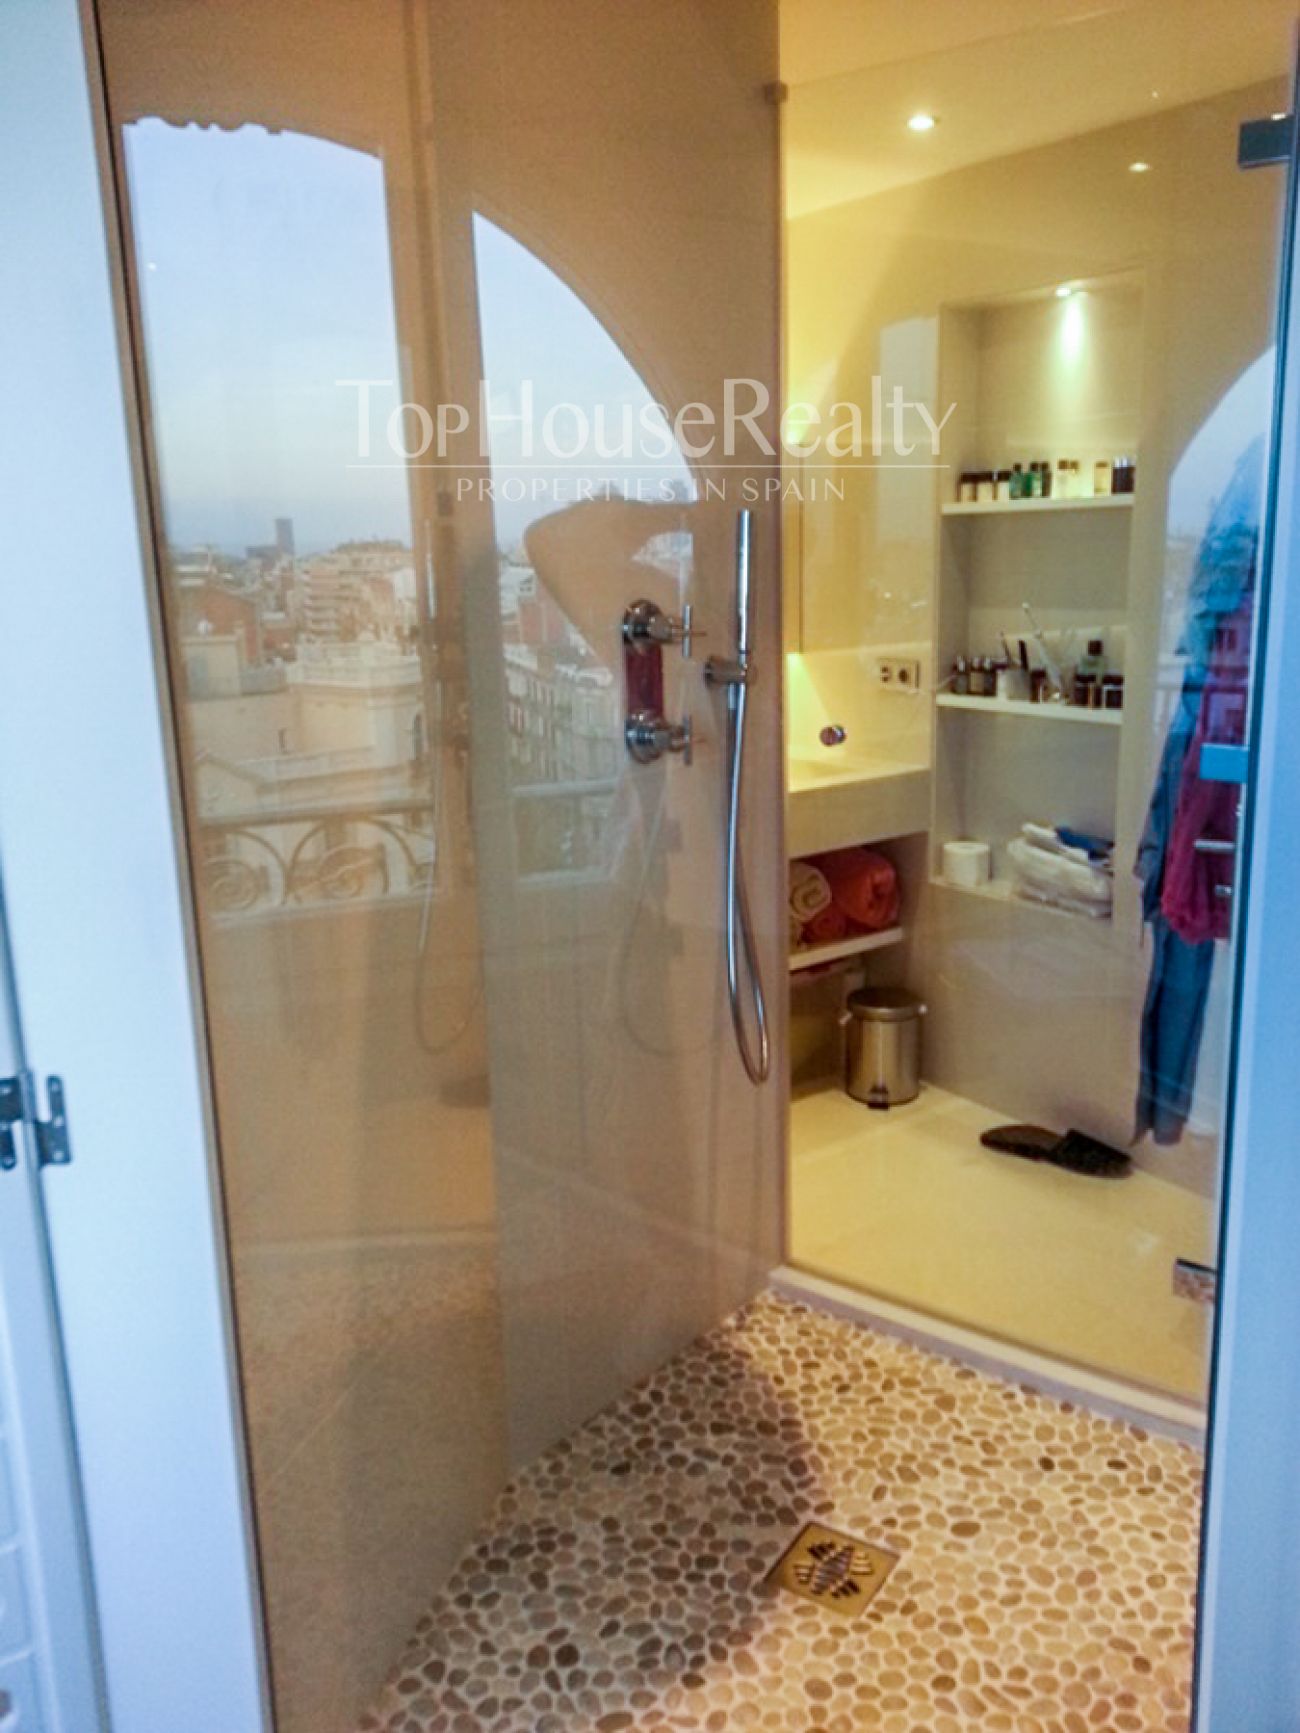 Luxury attic flat of 65 m2 with spectacular views in Barcelona